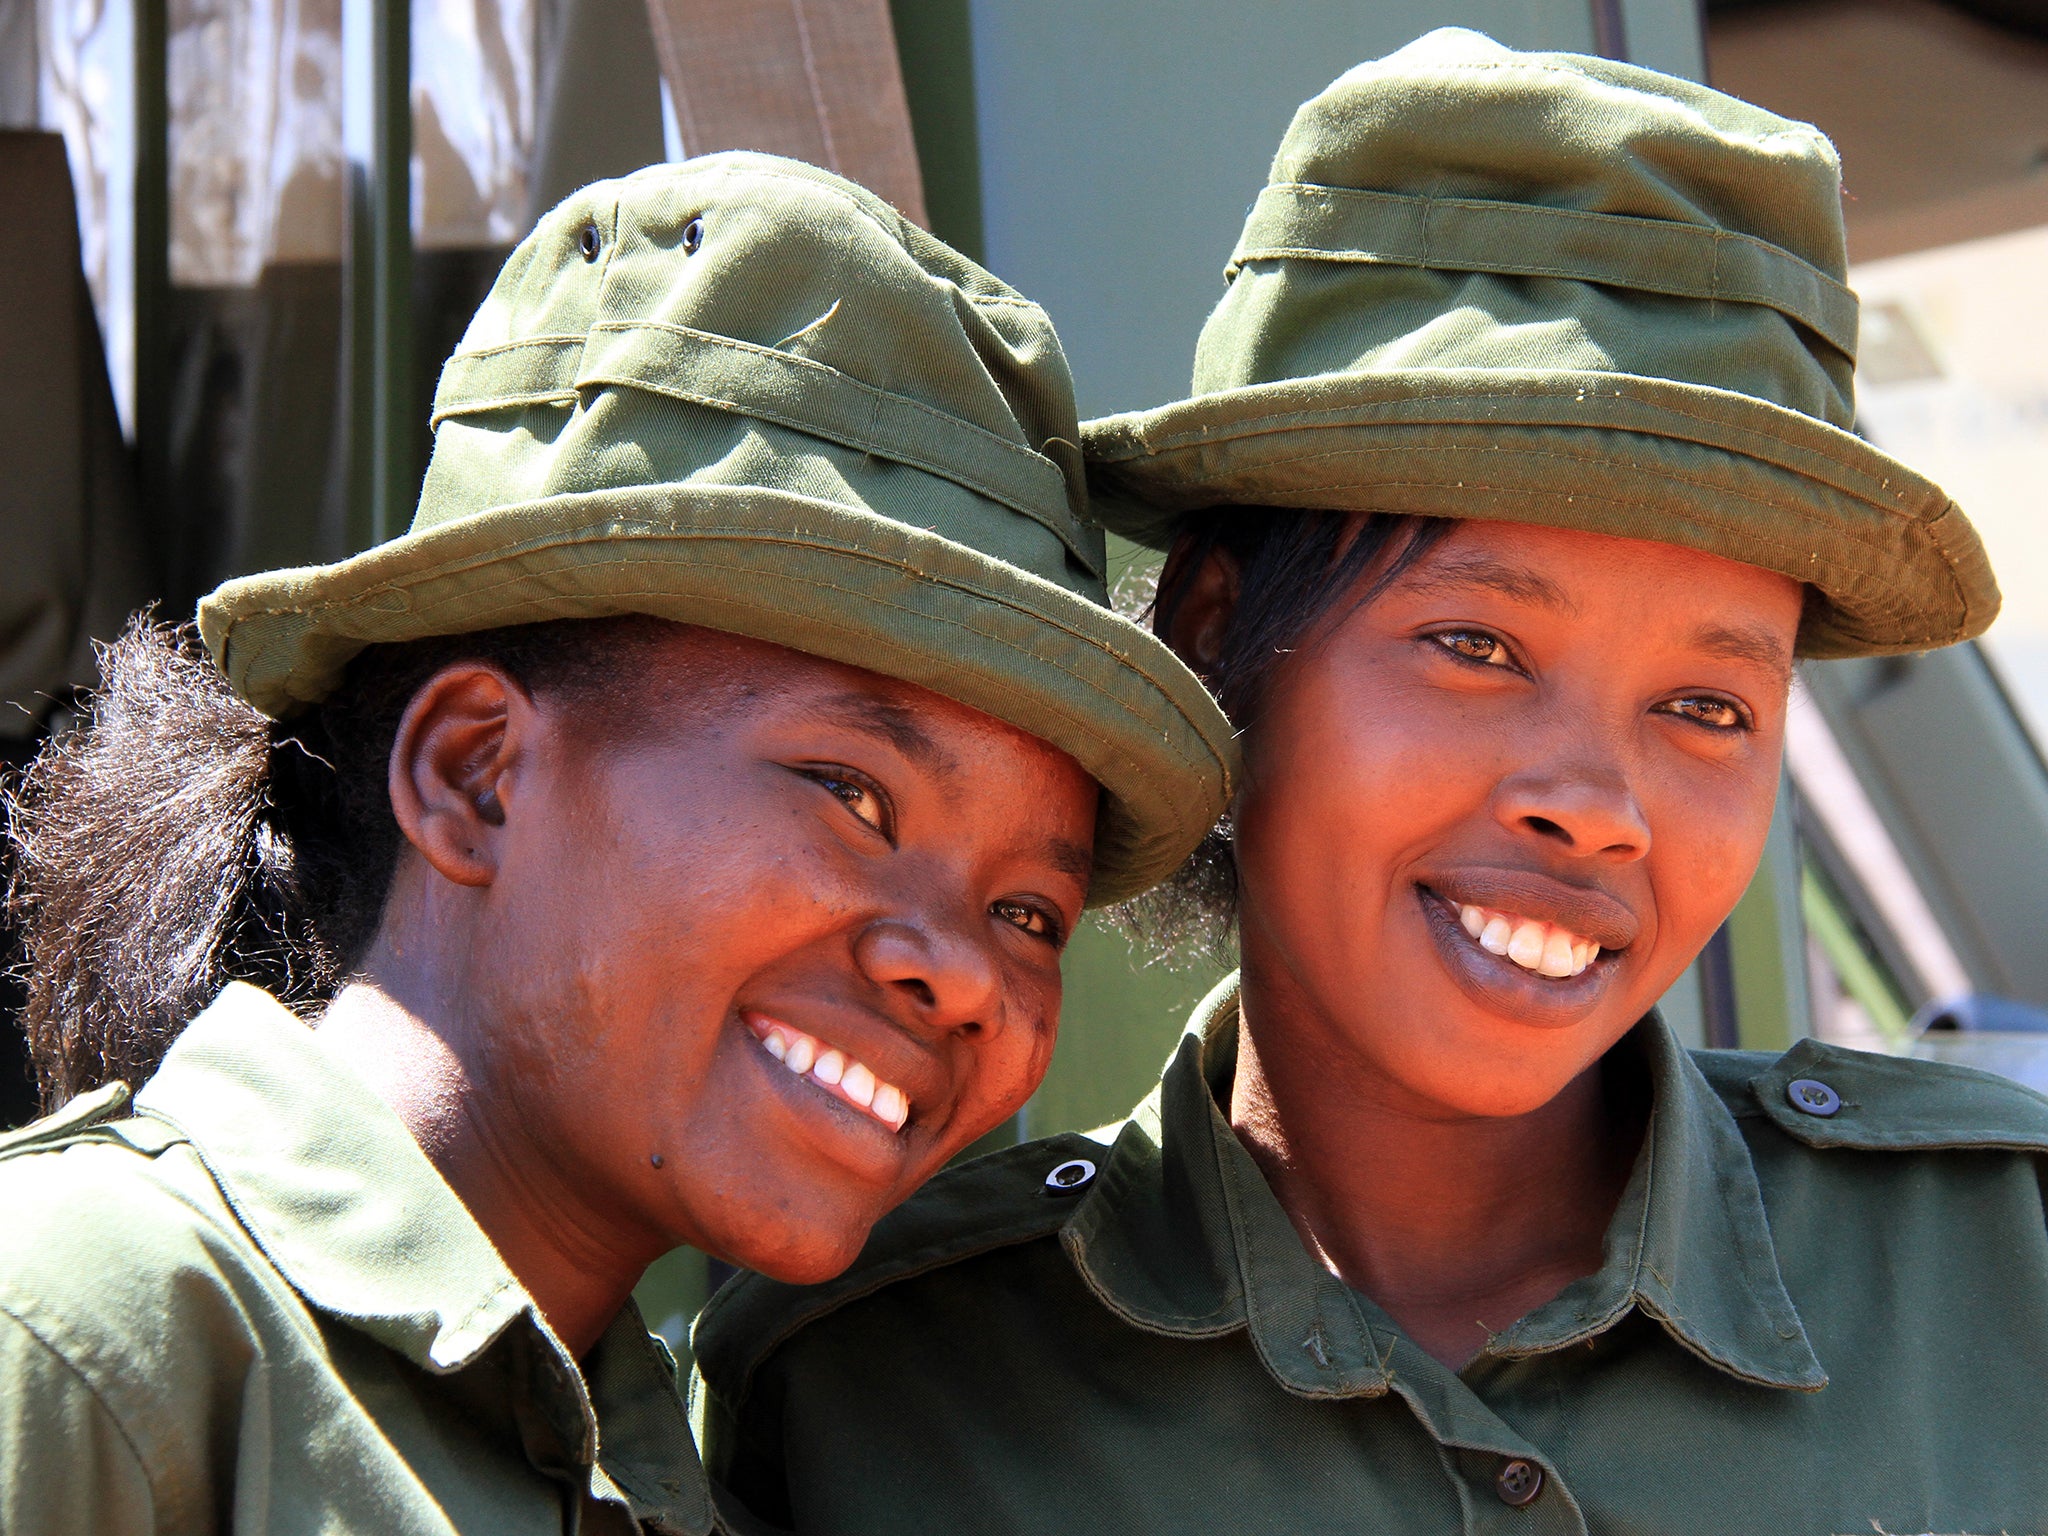 Purity Lakara and Eunice Peneti, two Maasai women who’ve joined Team Lioness, the first all-female rangers’ group in Tsavo